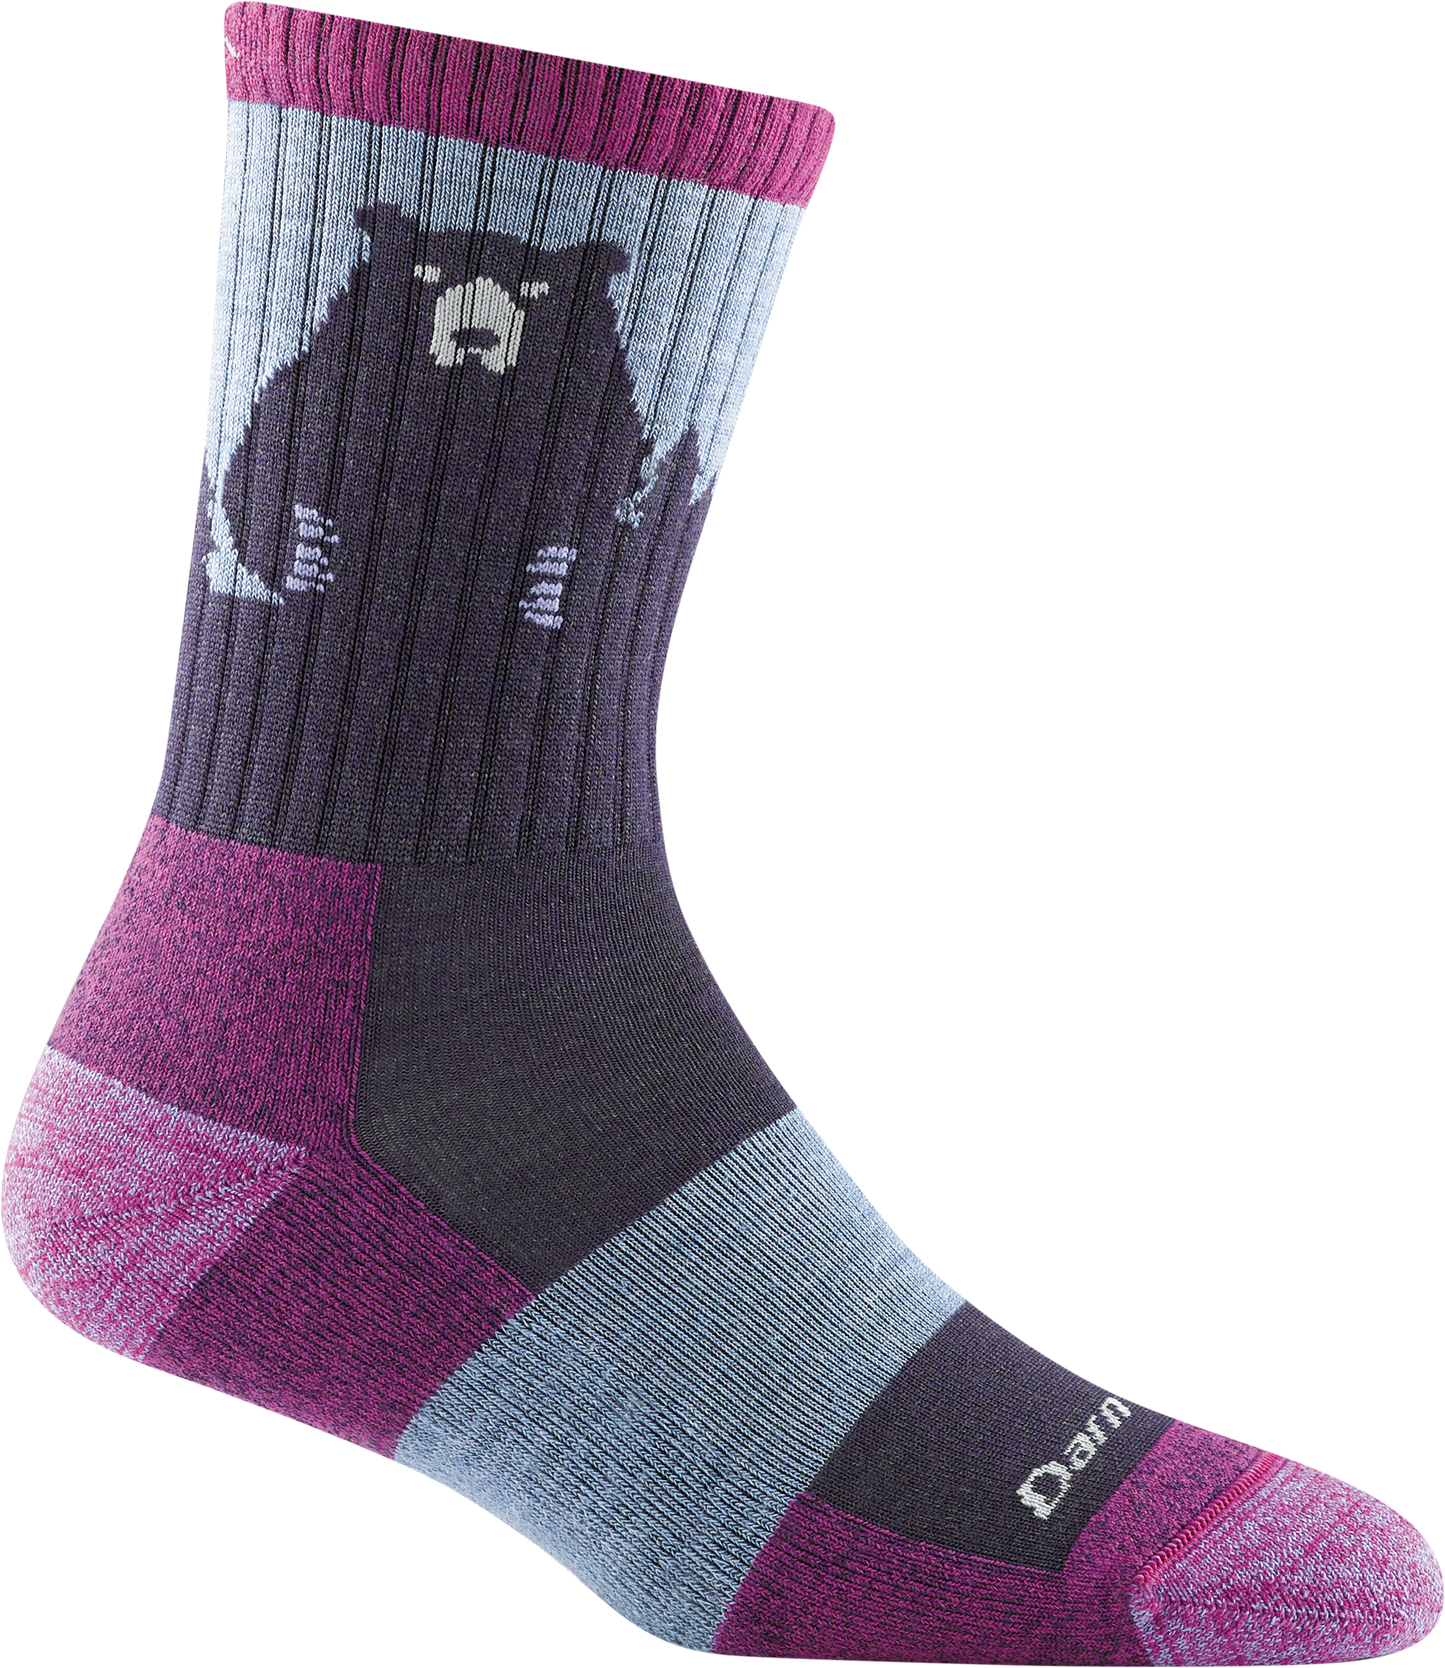 Darn tough pink, charcoal and light blue sock with bear detail